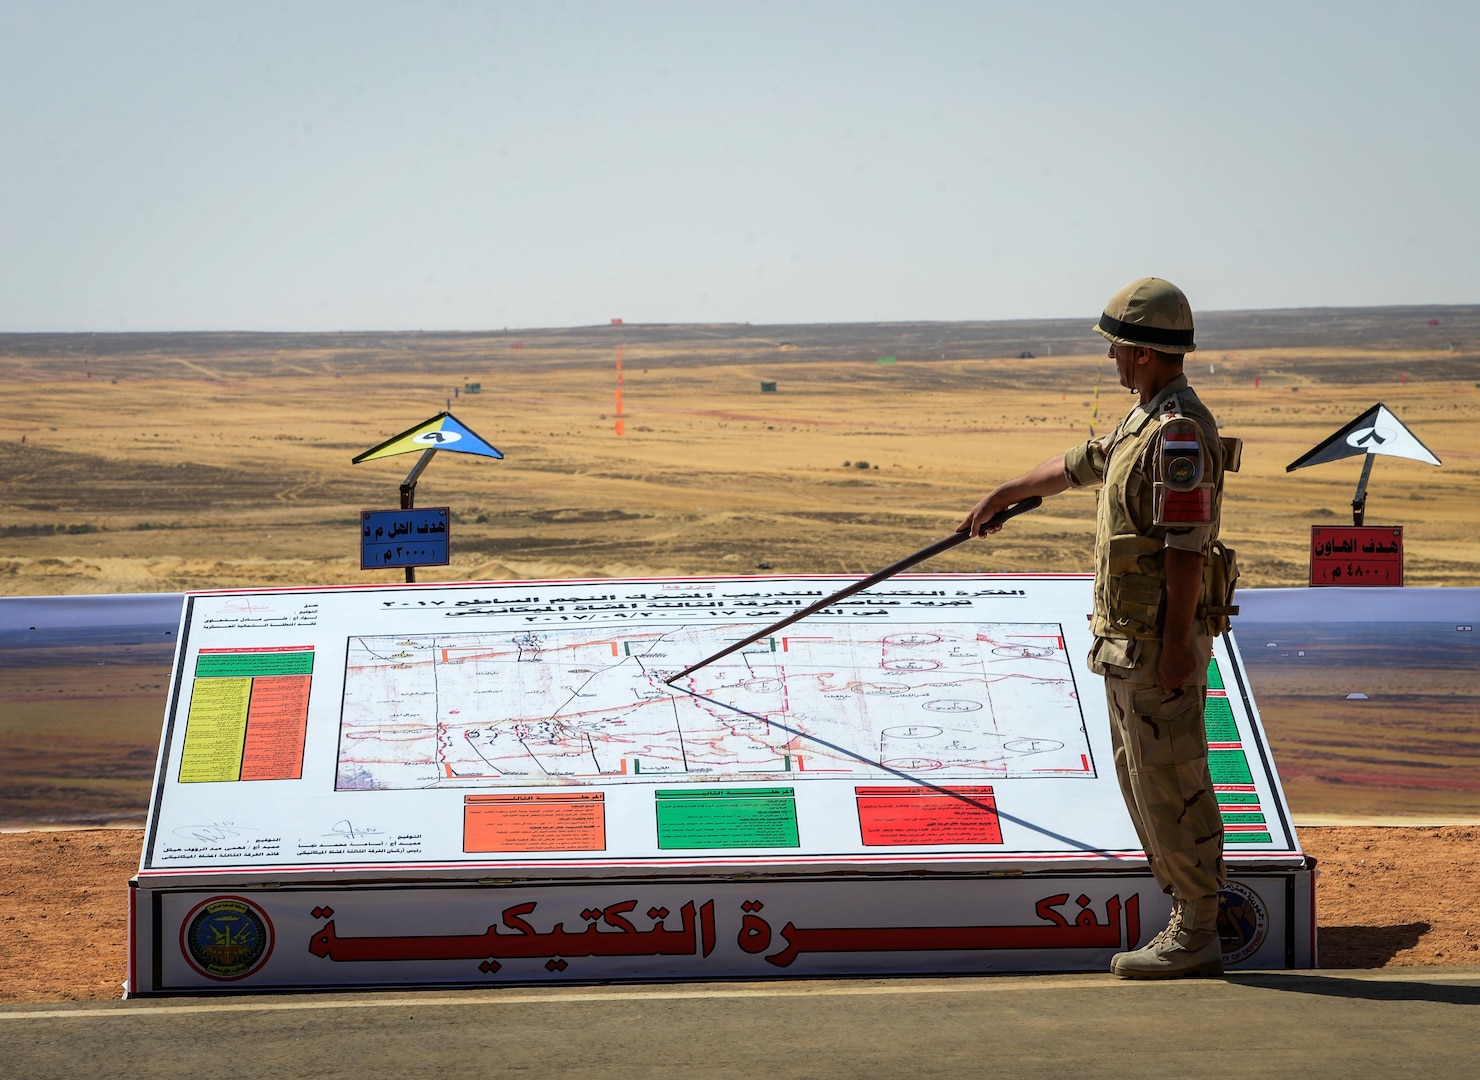 An Egyptian soldier points out exercise maneuvers before a combined arms live fire exercise during Bright Star 2017, Sept. 20, 2017, at Mohamed Naguib Military Base, Egypt. The bilateral exercise, Bright Star, targets strengthening military-to-military relationships between U.S. forces and its Egyptian partners in the CENTCOM area of responsibility. (U.S. Air Force photo by Staff Sgt. Michael Battles)